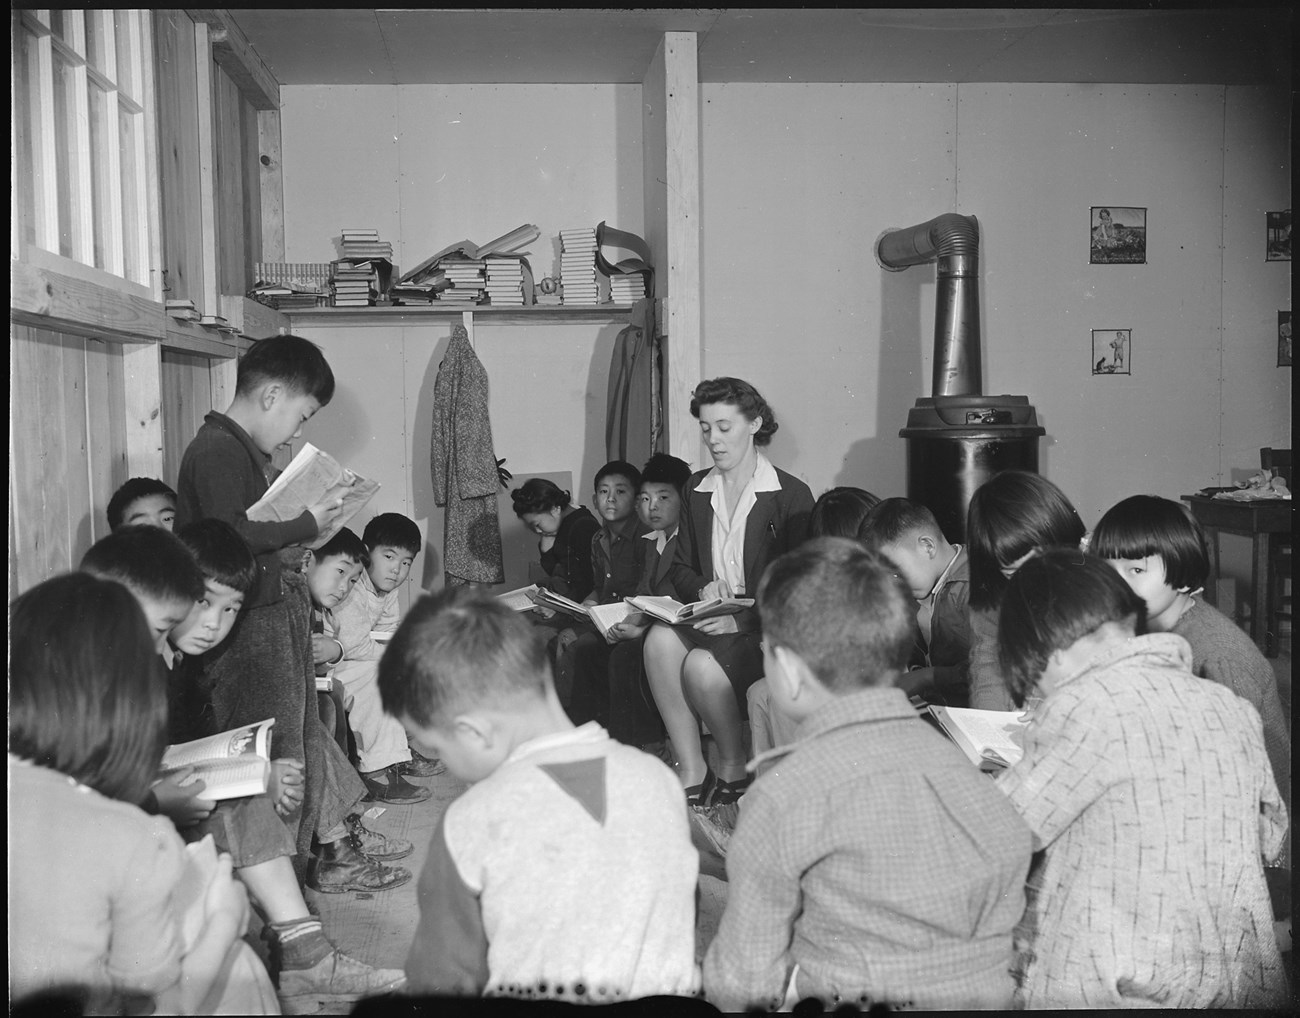 Students of Japanese ancestry sit in a circle with books in their laps. On the left, one boy stands and seems to be reading from his book. Just right of center, a white woman sits in the circle and is reading her book. There is a pile of books, a few coat